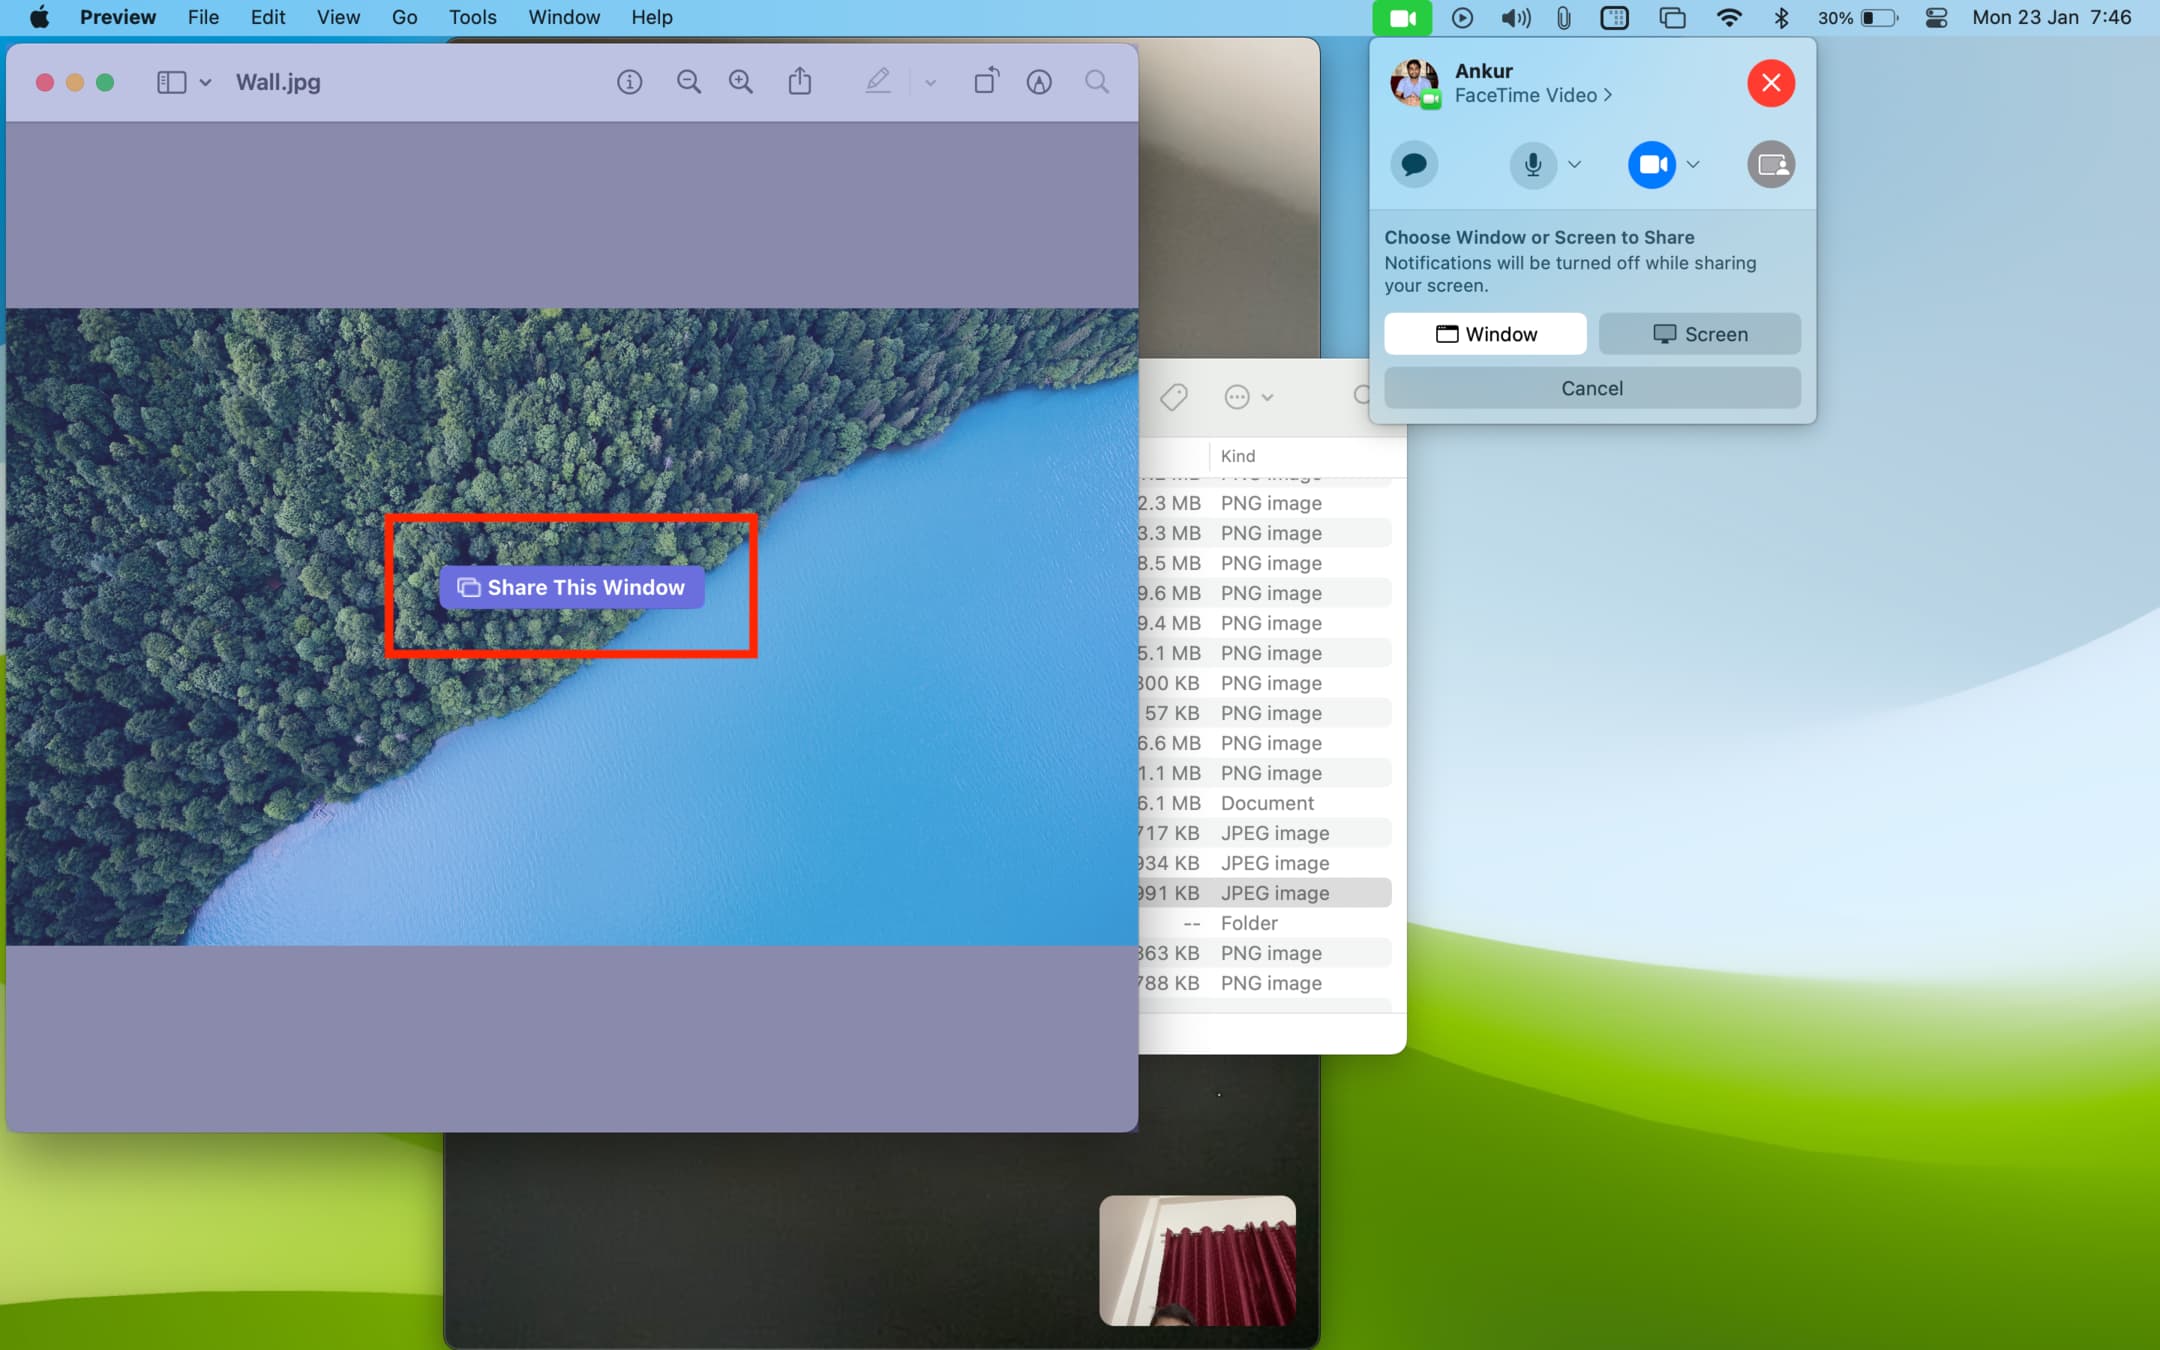 Share This Window via FaceTime on Mac